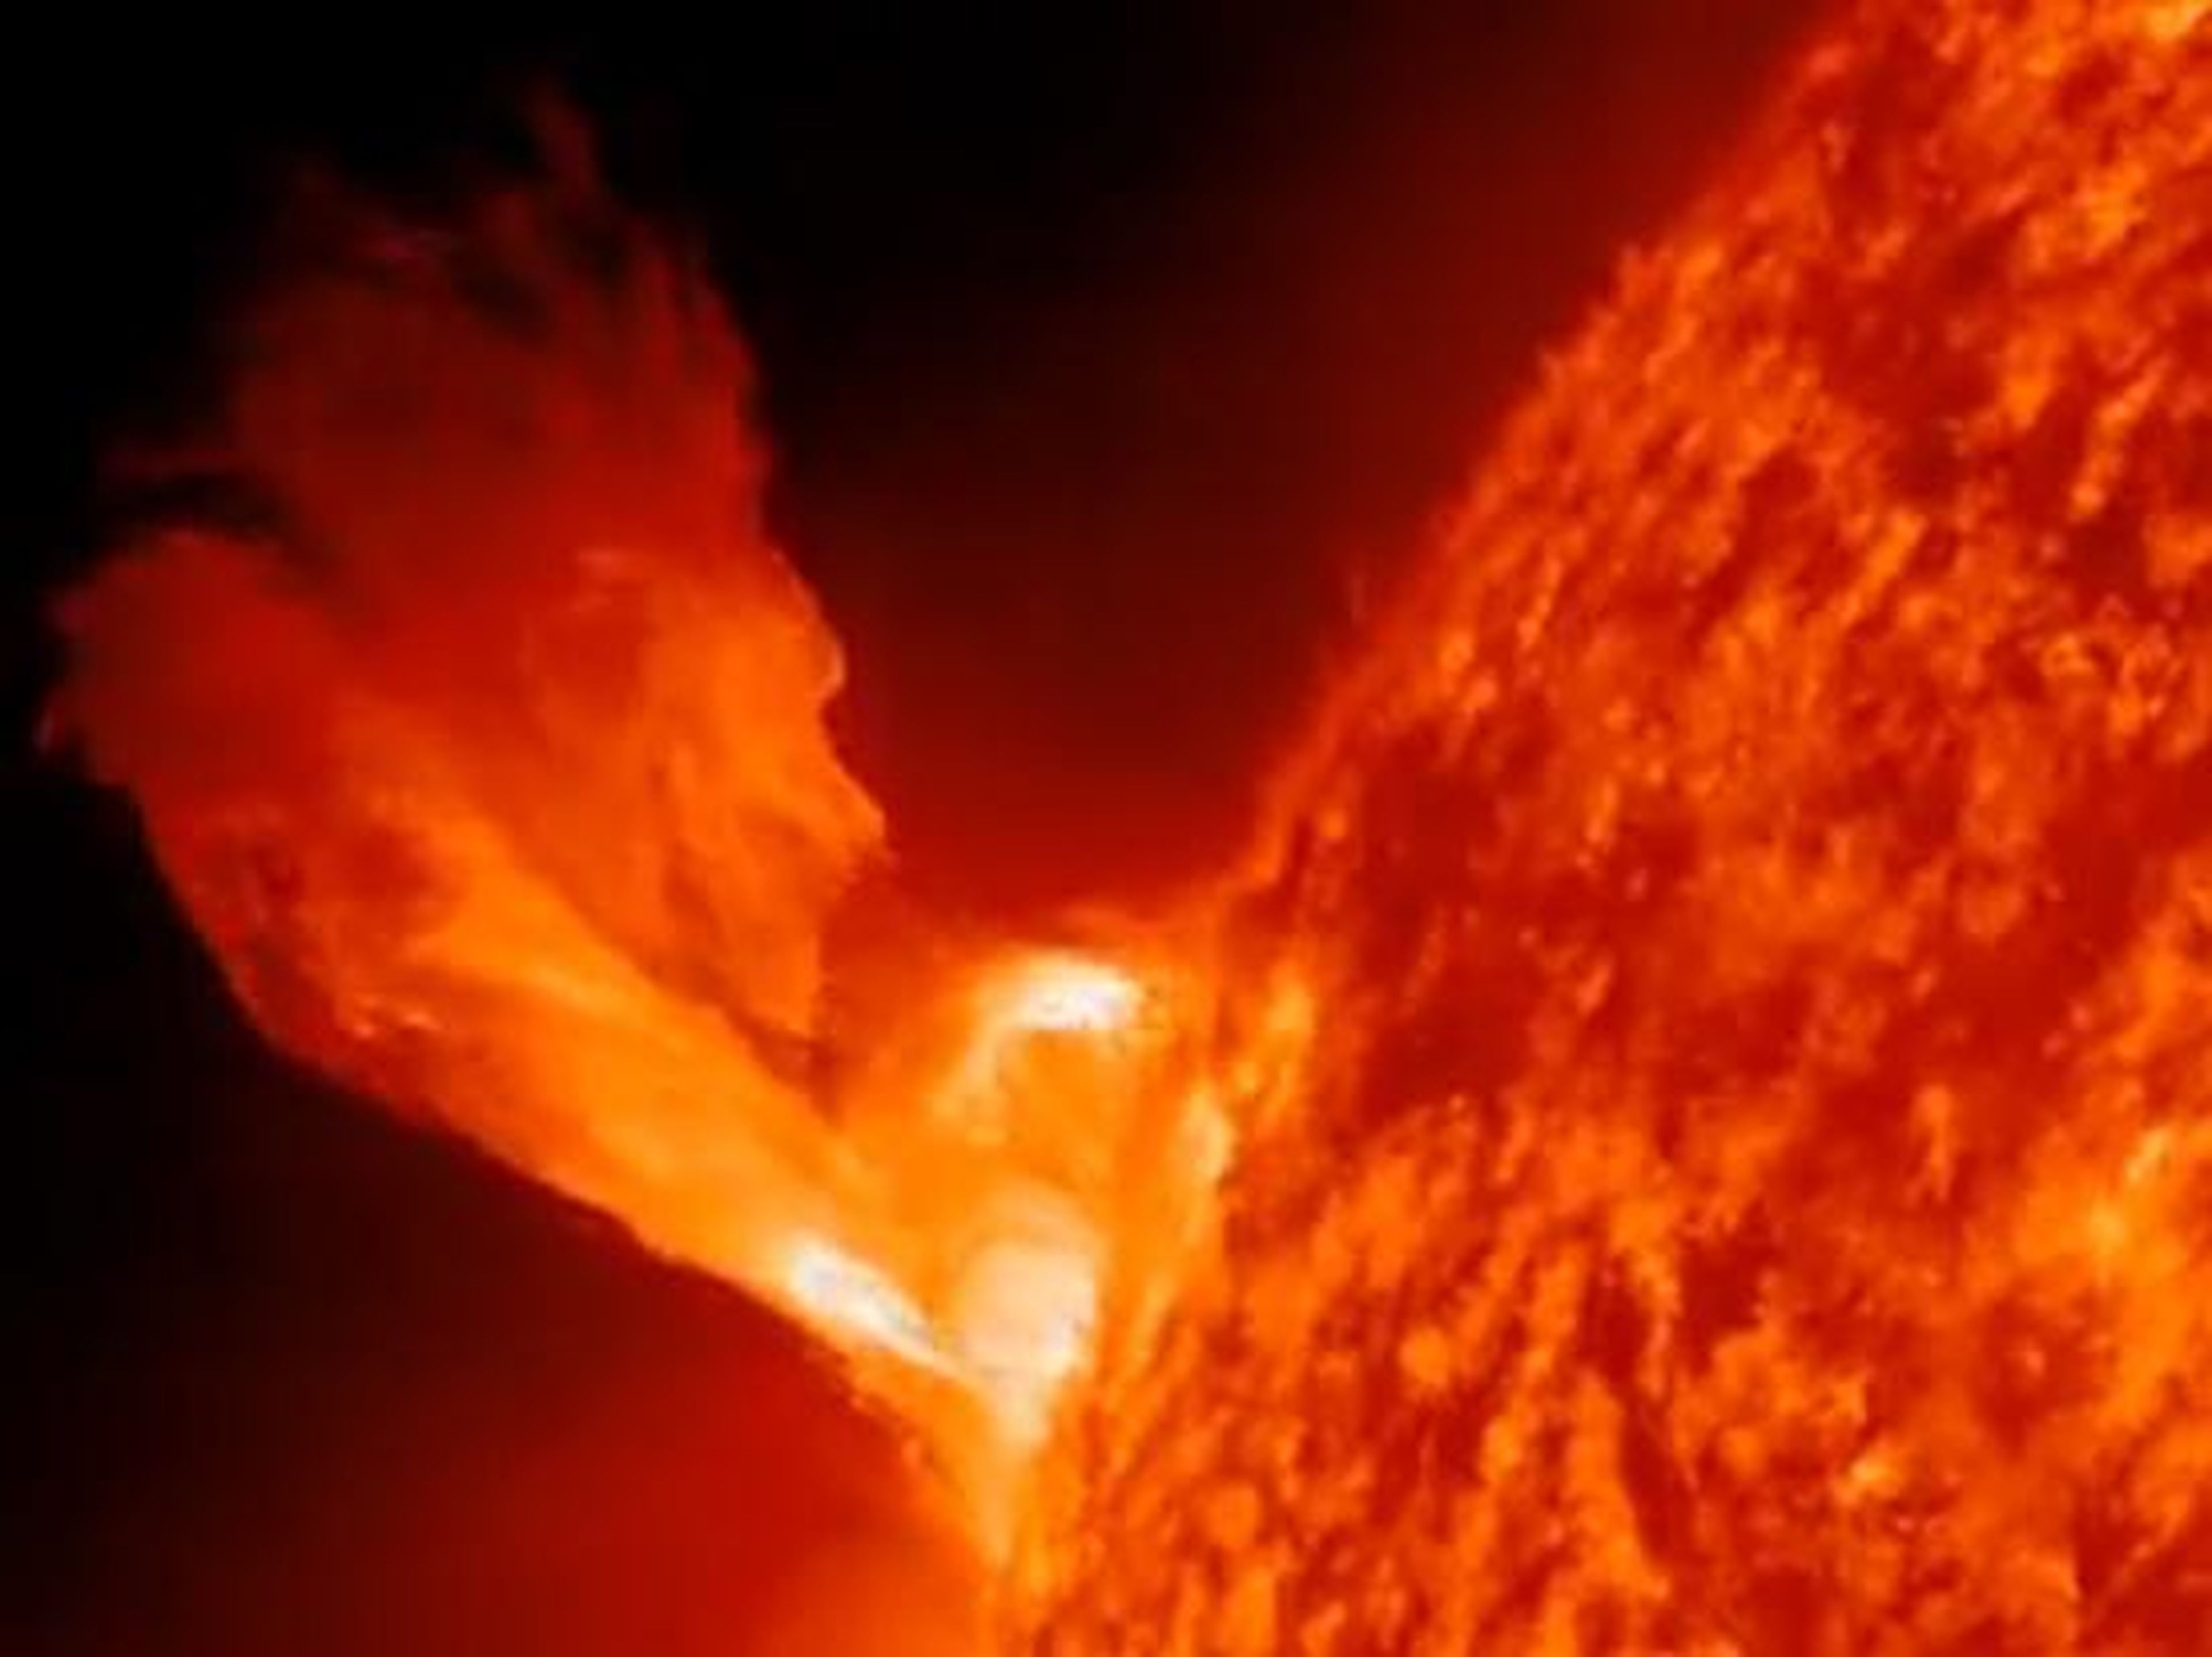 8. A solar flare creates chaos and inflicts $2 trillion of damage